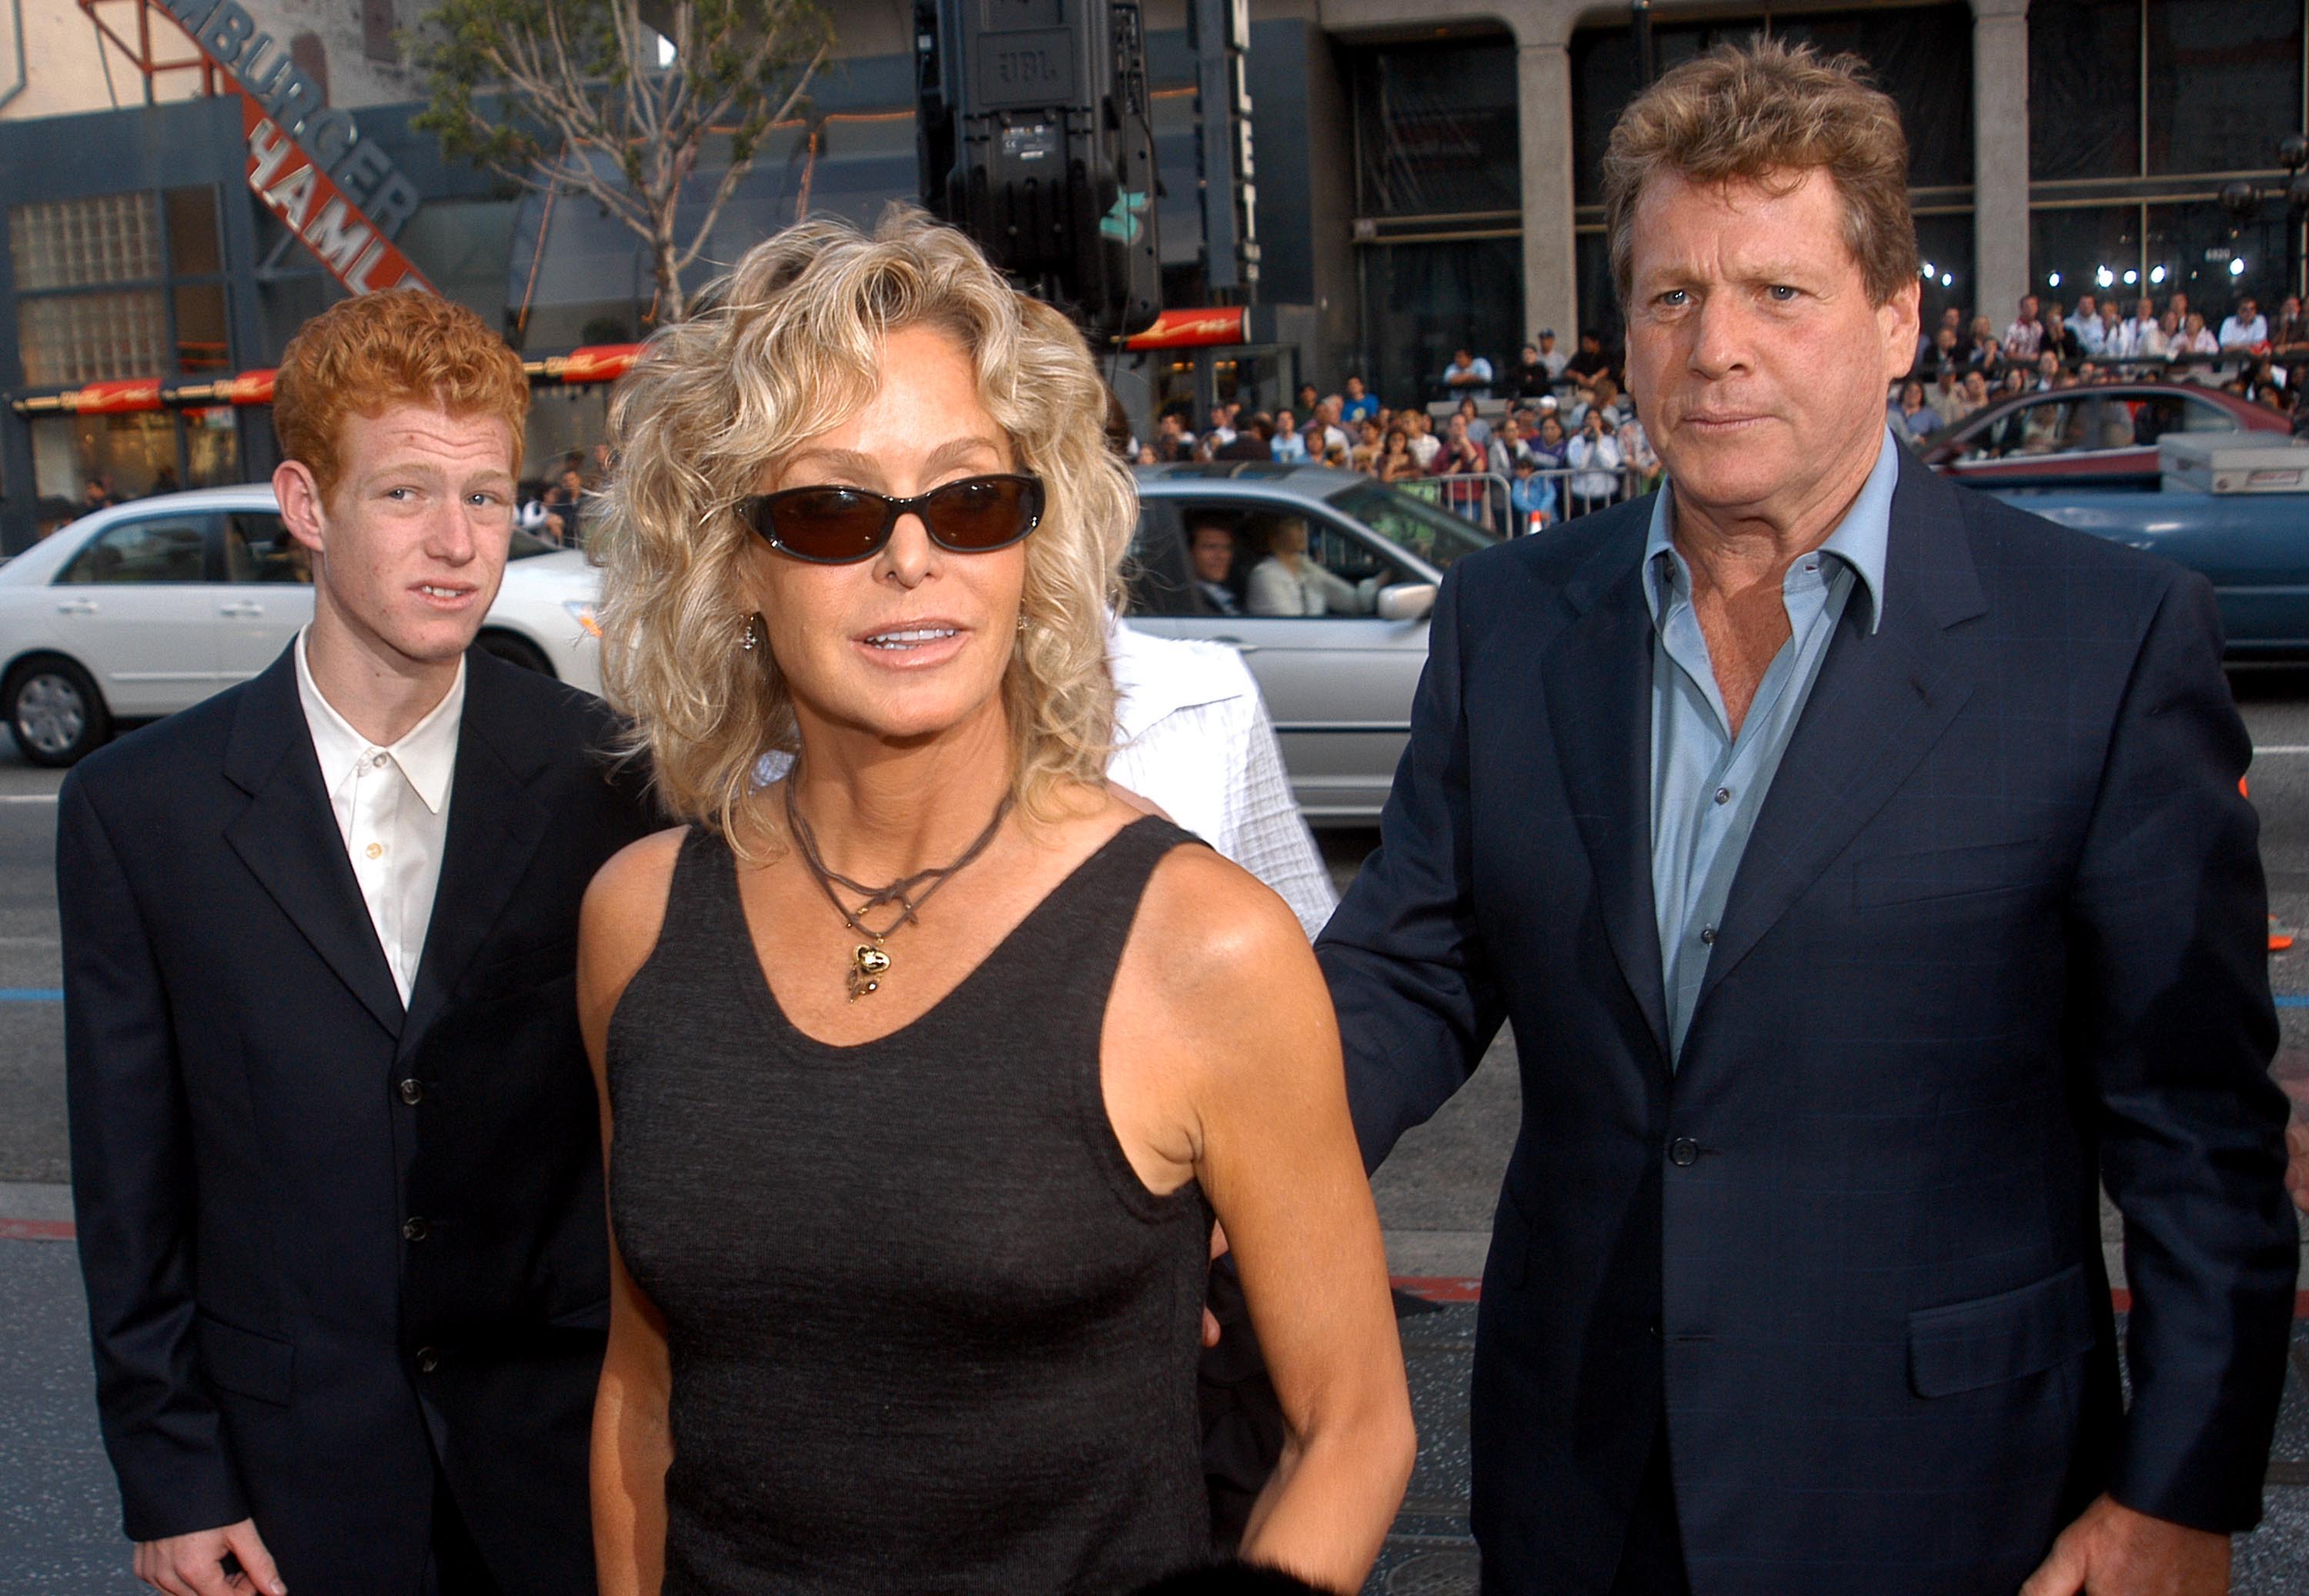 Farrah Fawcett (center), son Redmond and Ryan O'Neal attend "Malibu's Most Wanted" Los Angeles Premiere on April 10, 2003 in Los Angeles, California ┃Source: Getty Images